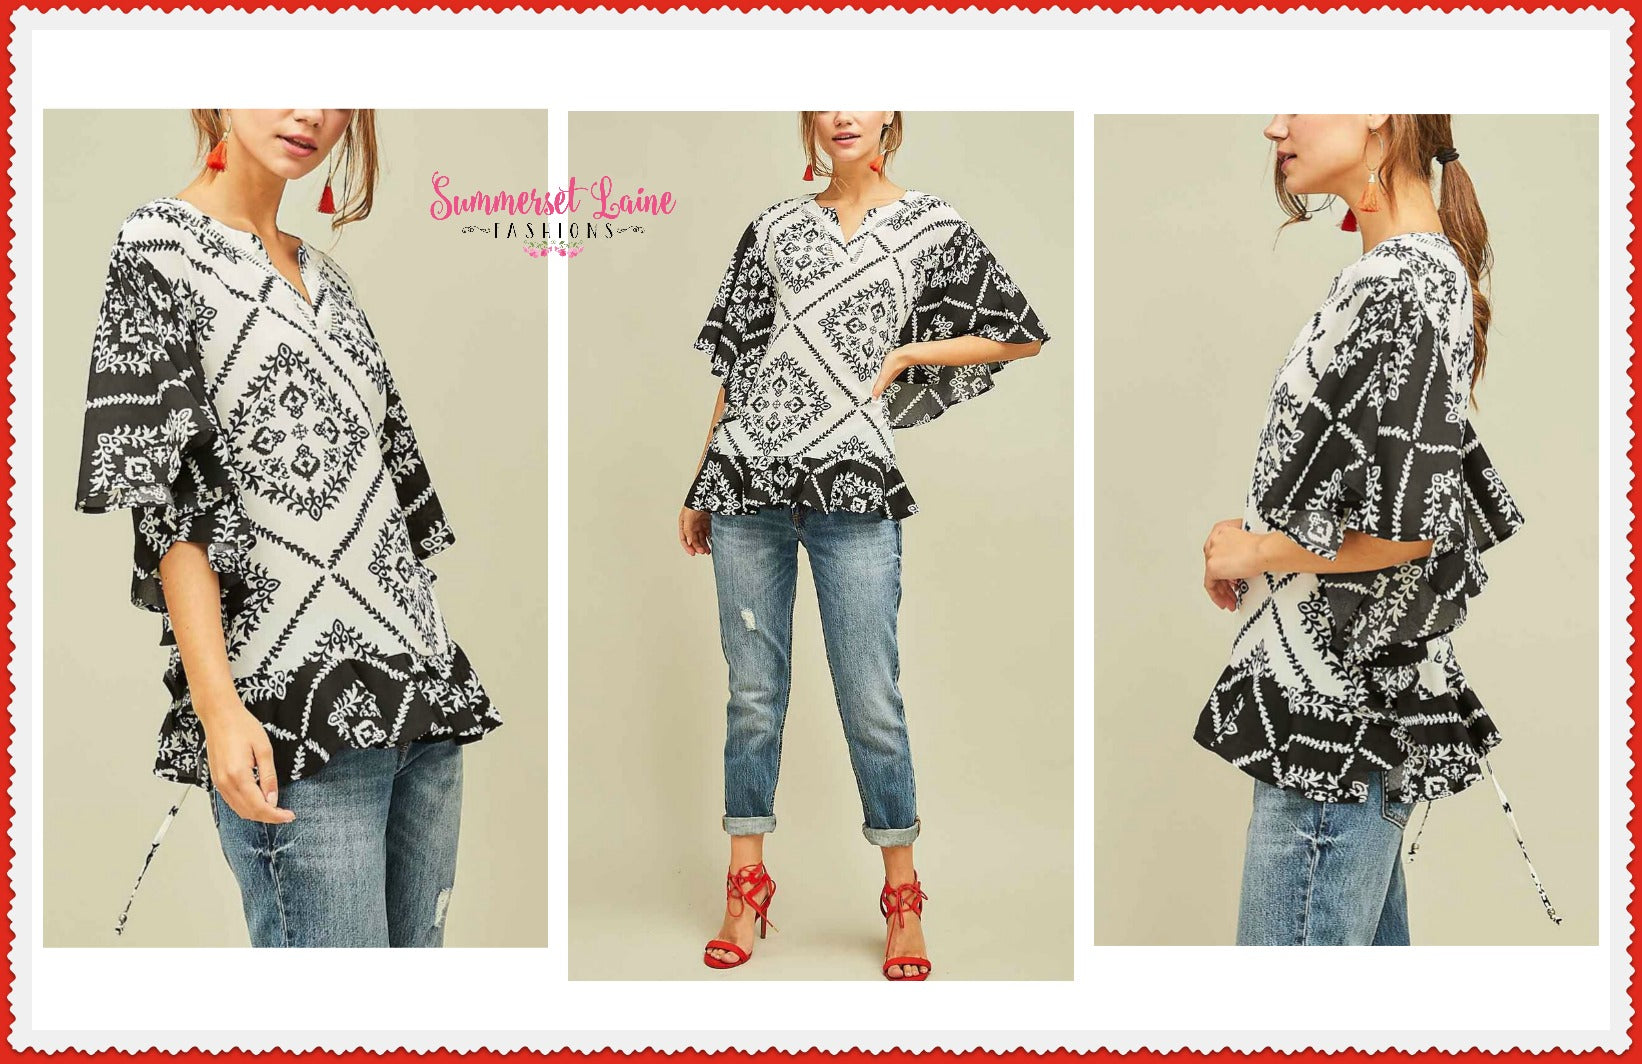 Paisley Print Top with Contrast Color Sleeves and Hem